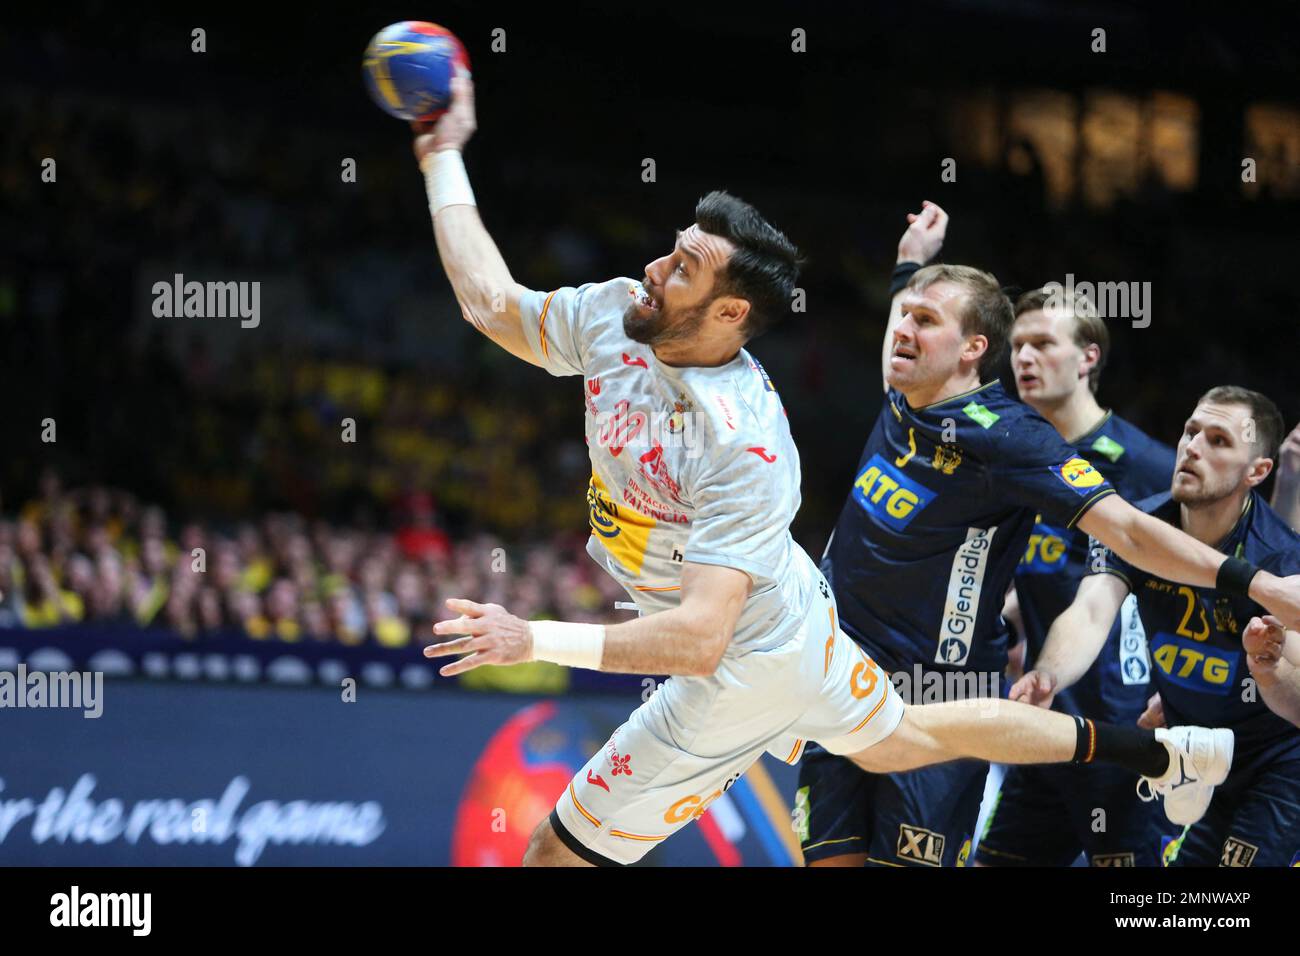 Gedeon Guardiola Villaplana of Spain during the IHF Men's World Championship 2023, Placement matches 3-4, Handball match between Sweden and Spain on January 29, 2023 at Tele2 Arena in Stockholm, Sweden. Photo by Laurent Lairys/ABACAPRESS.COM Stock Photo